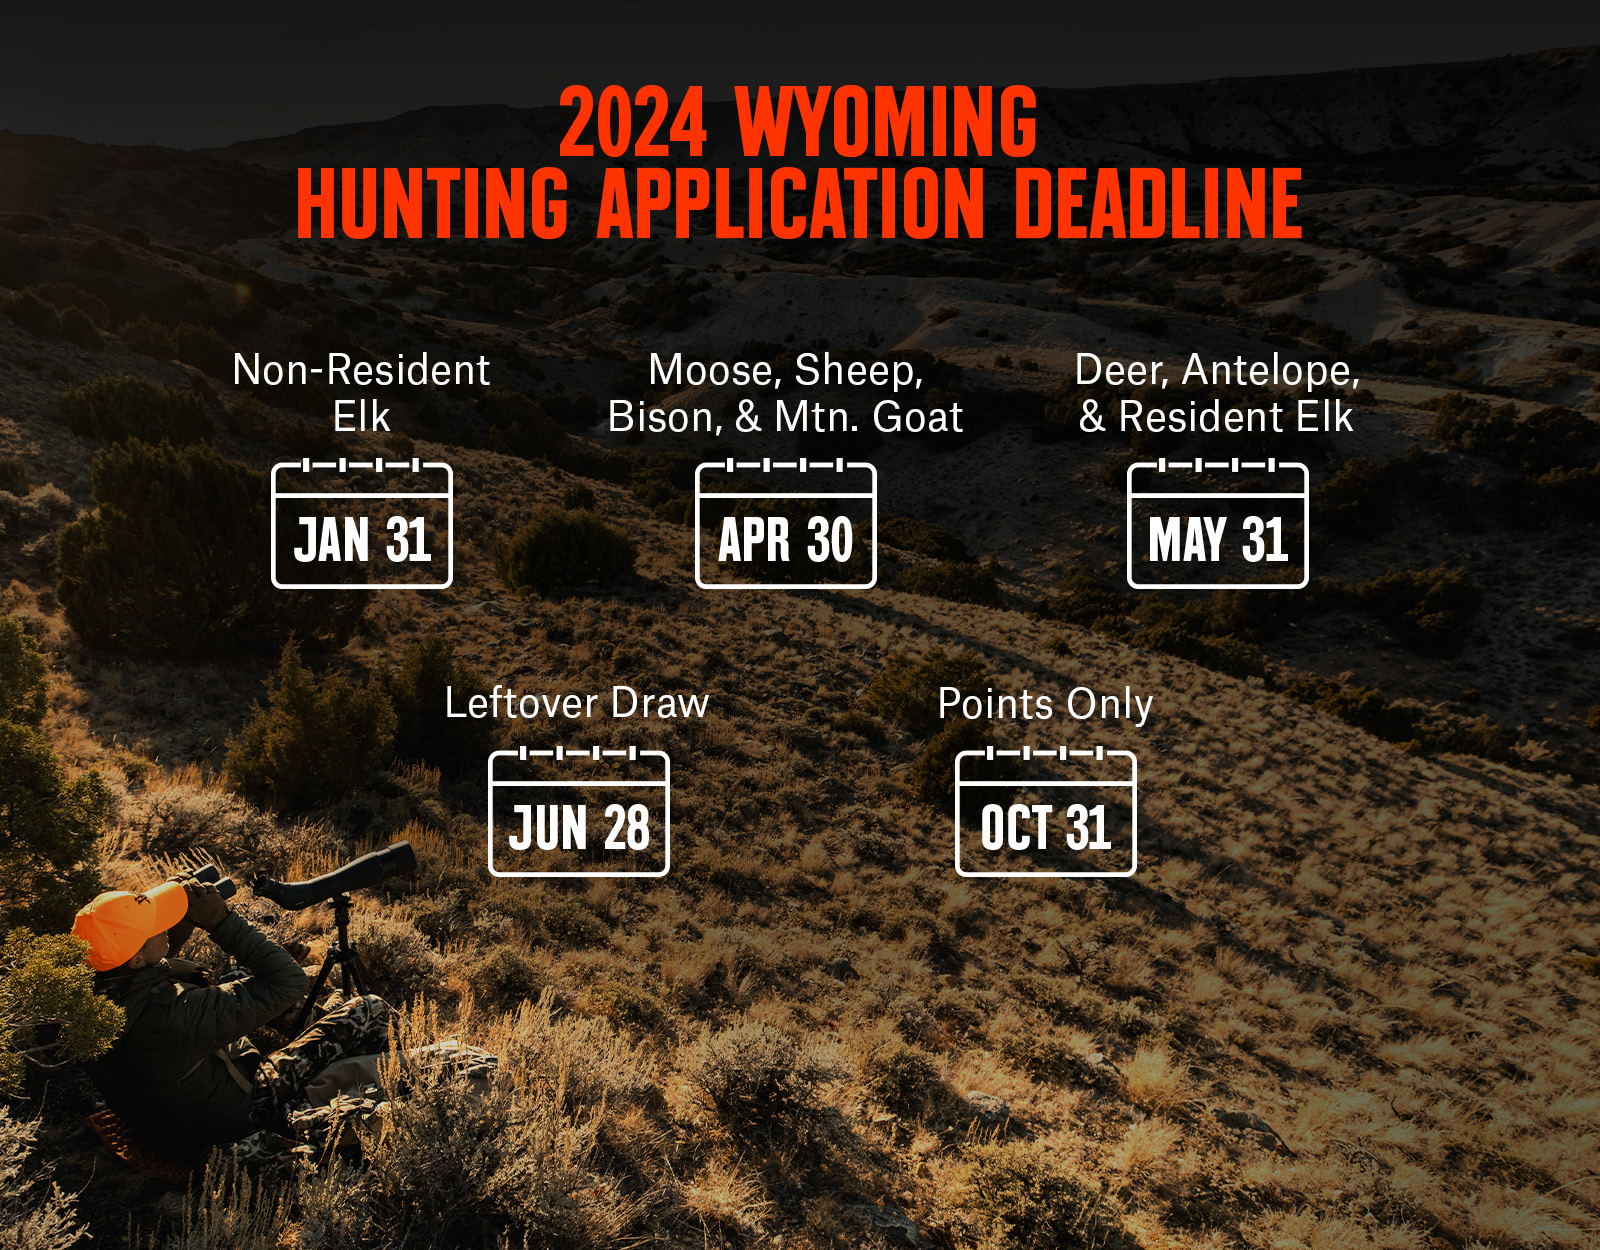 Infographic showing 2024 Wyoming hunting application deadlines by species. 